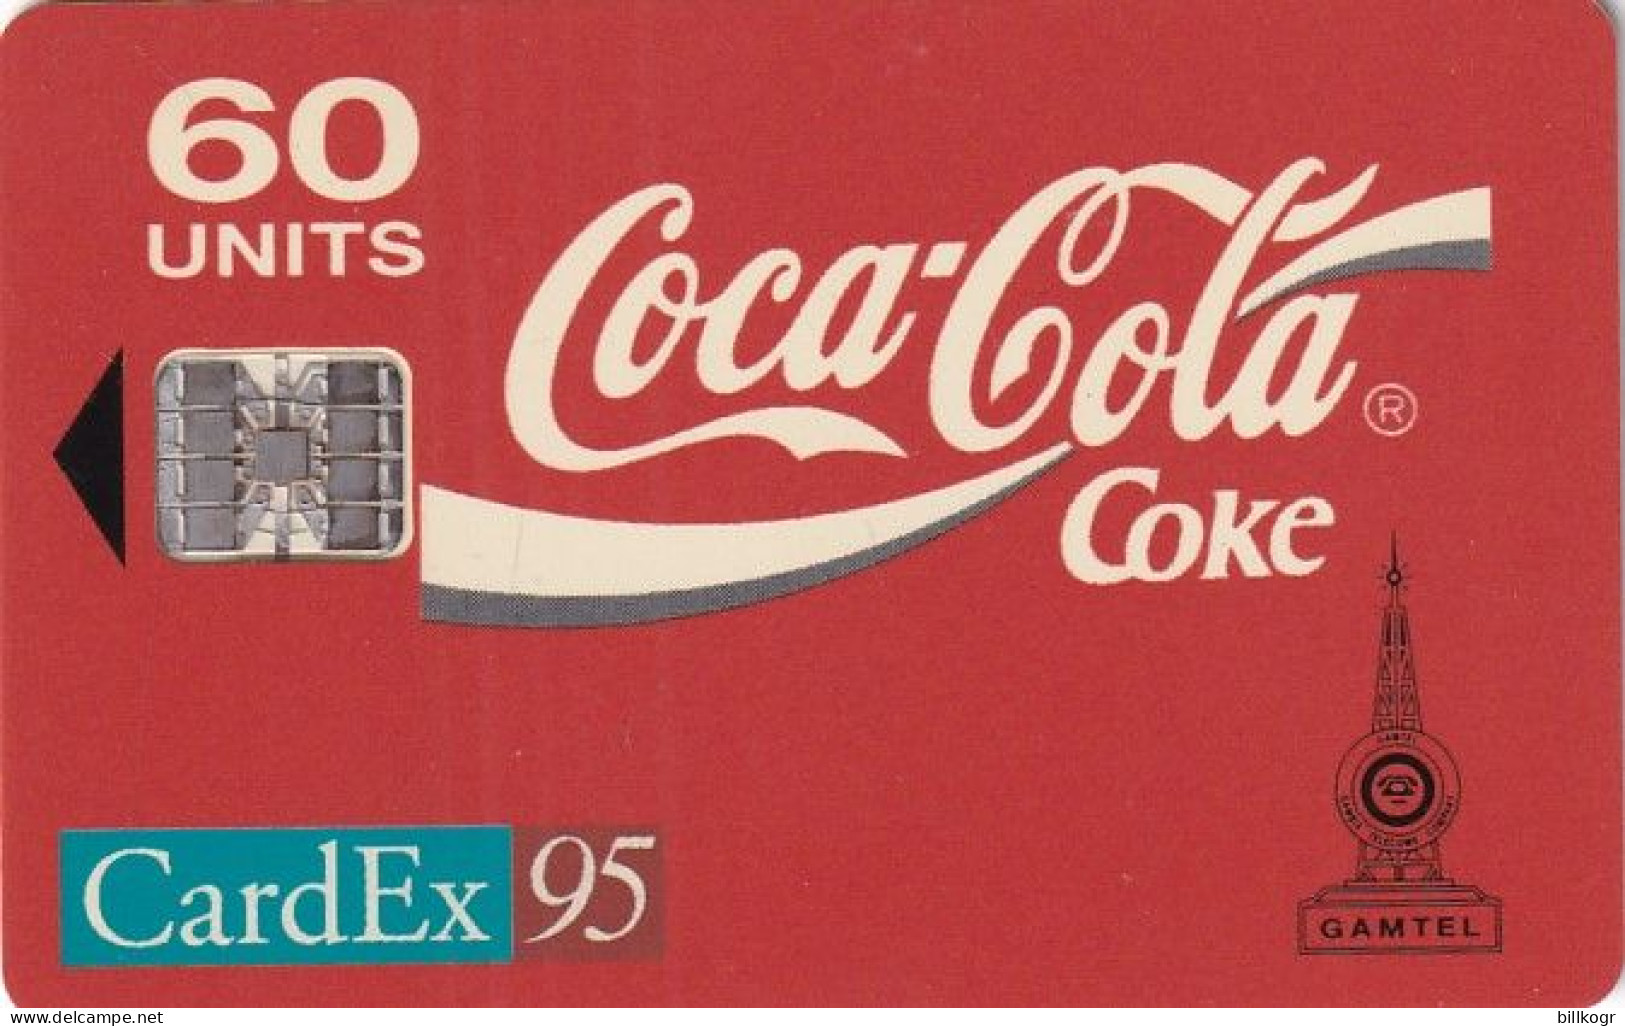 GAMBIA - Coca Cola, CardEx 95, Used - Gambie